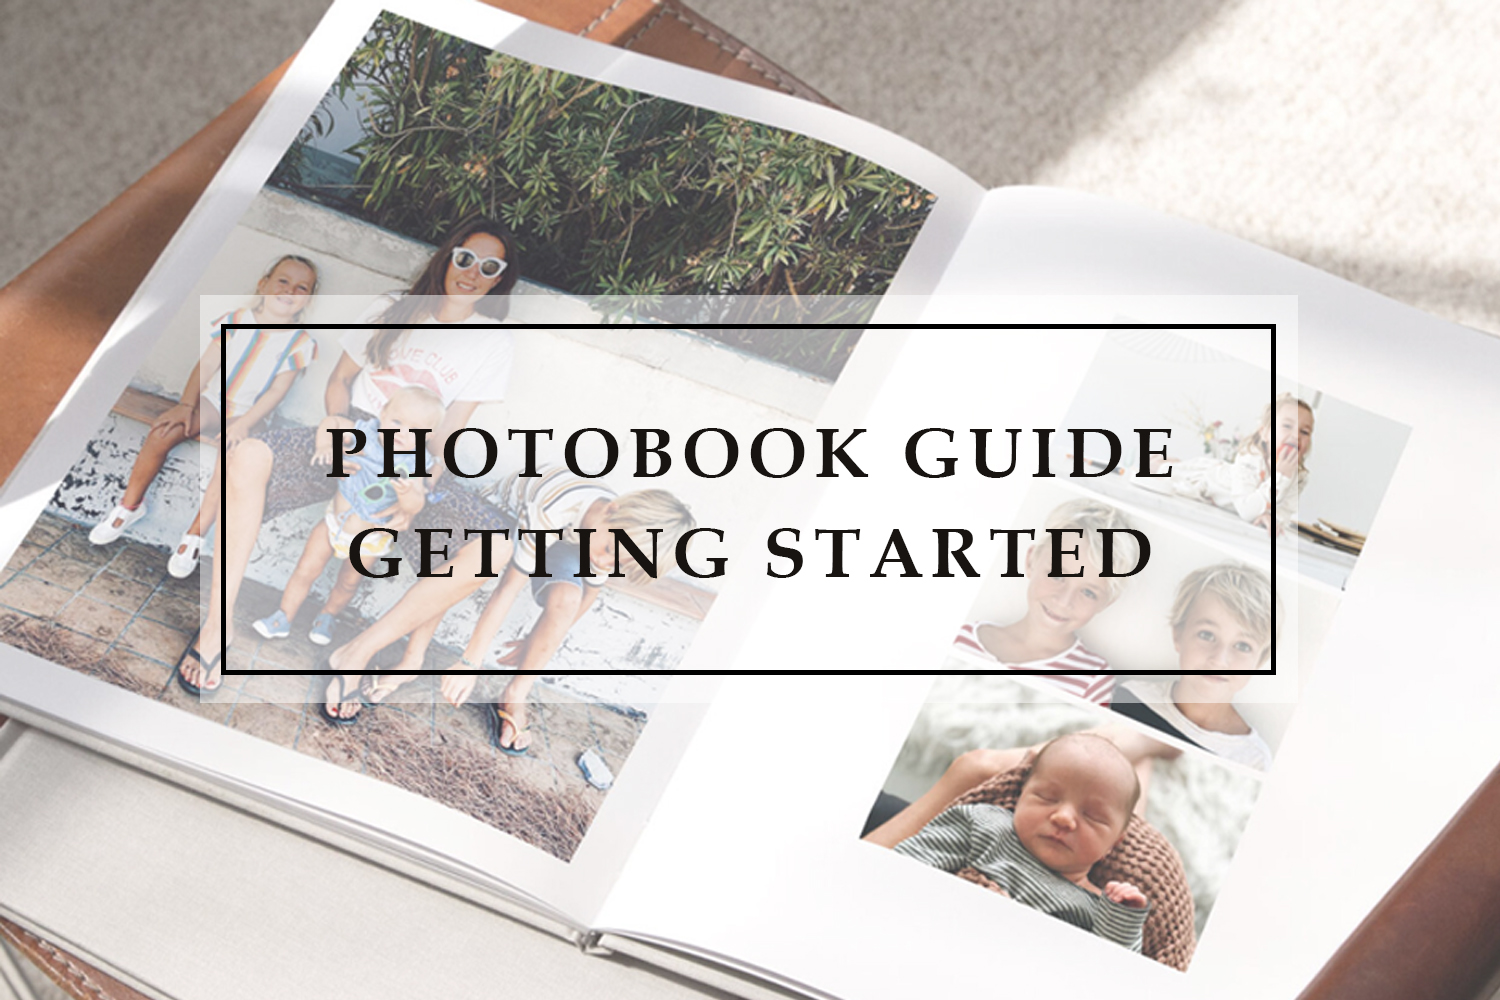 Photobook guide getting started